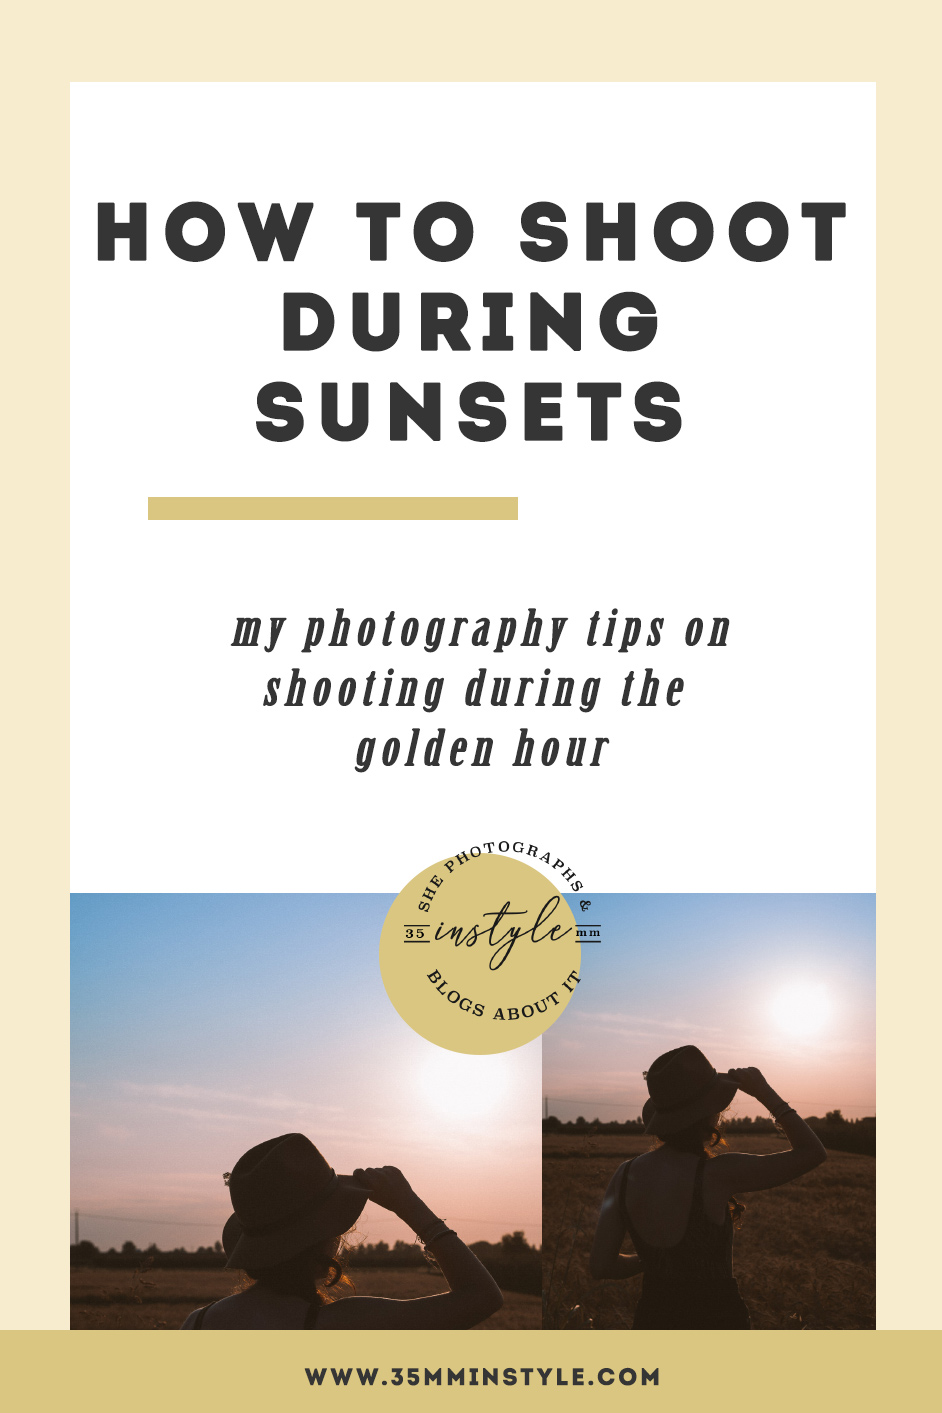 How to shoots during sunsets and the golden hour